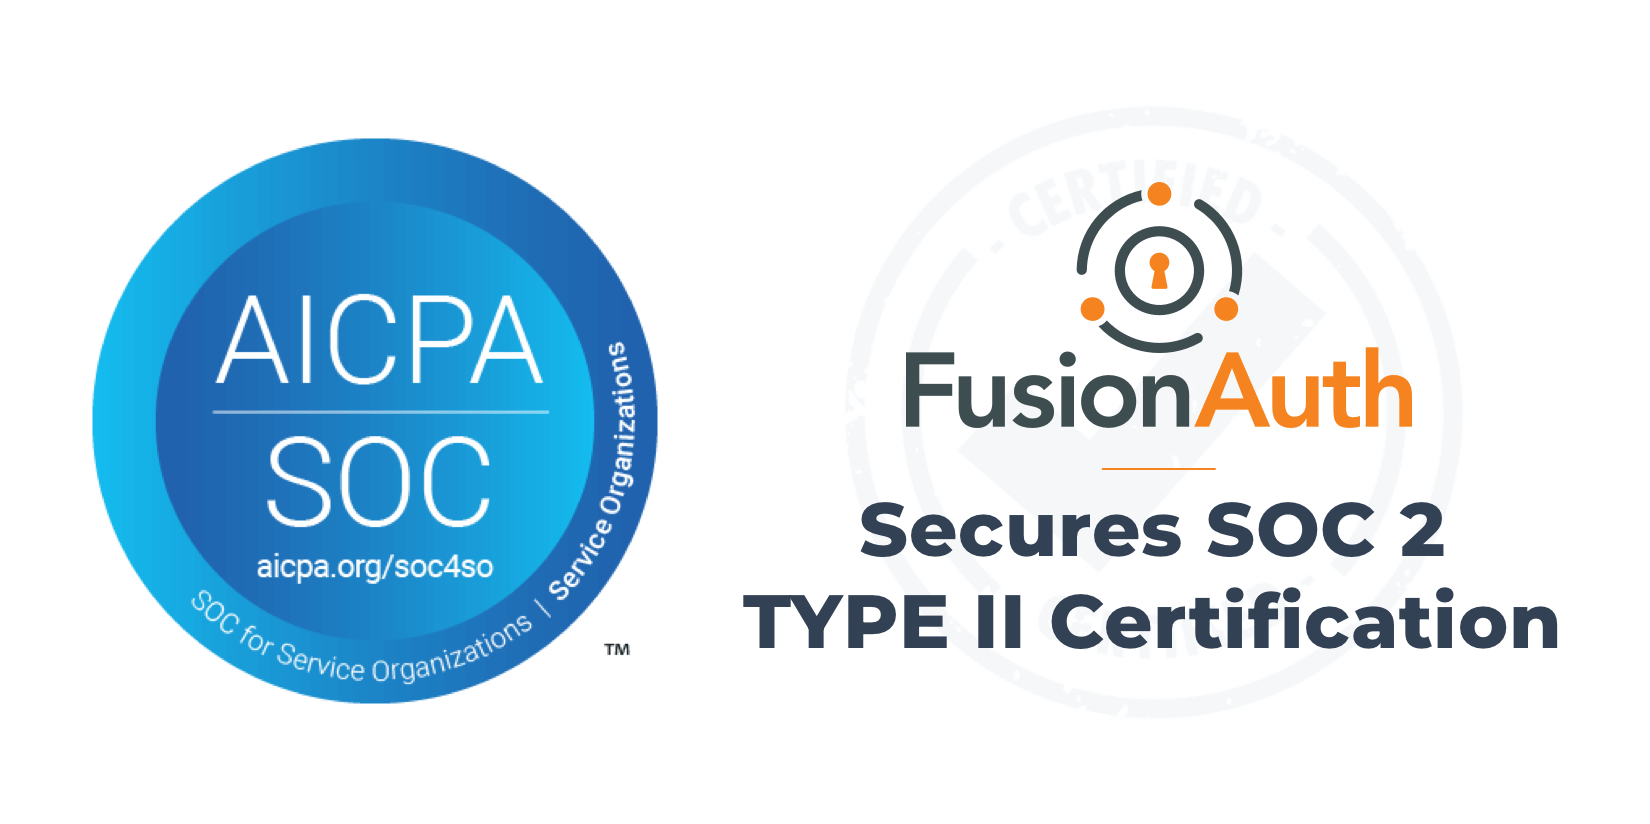 FusionAuth Secures SOC 2 Type 2 Certification